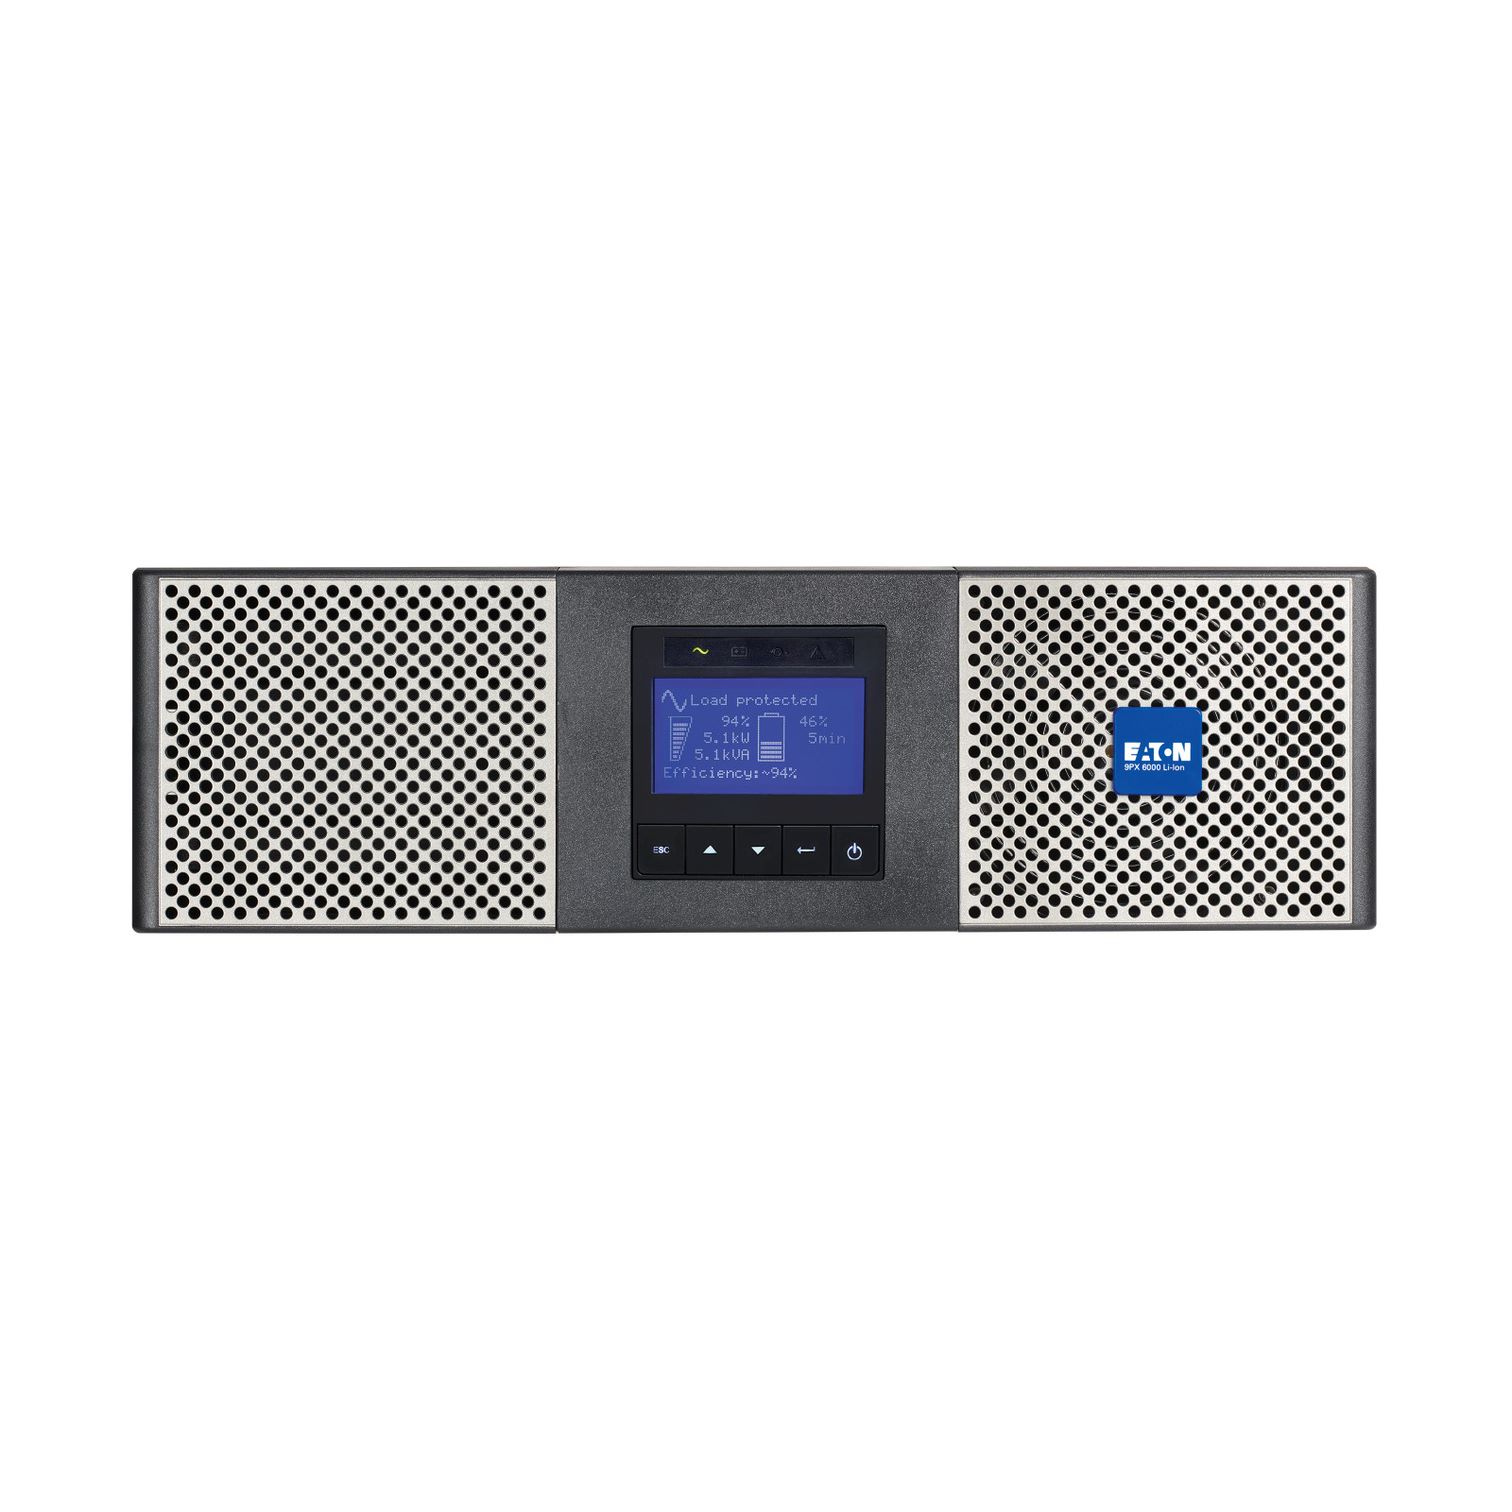 Eaton Delivers 9PX Lithium-ion UPS in new 6 kVA Power Rating with Remote Firmware Upgrades and 